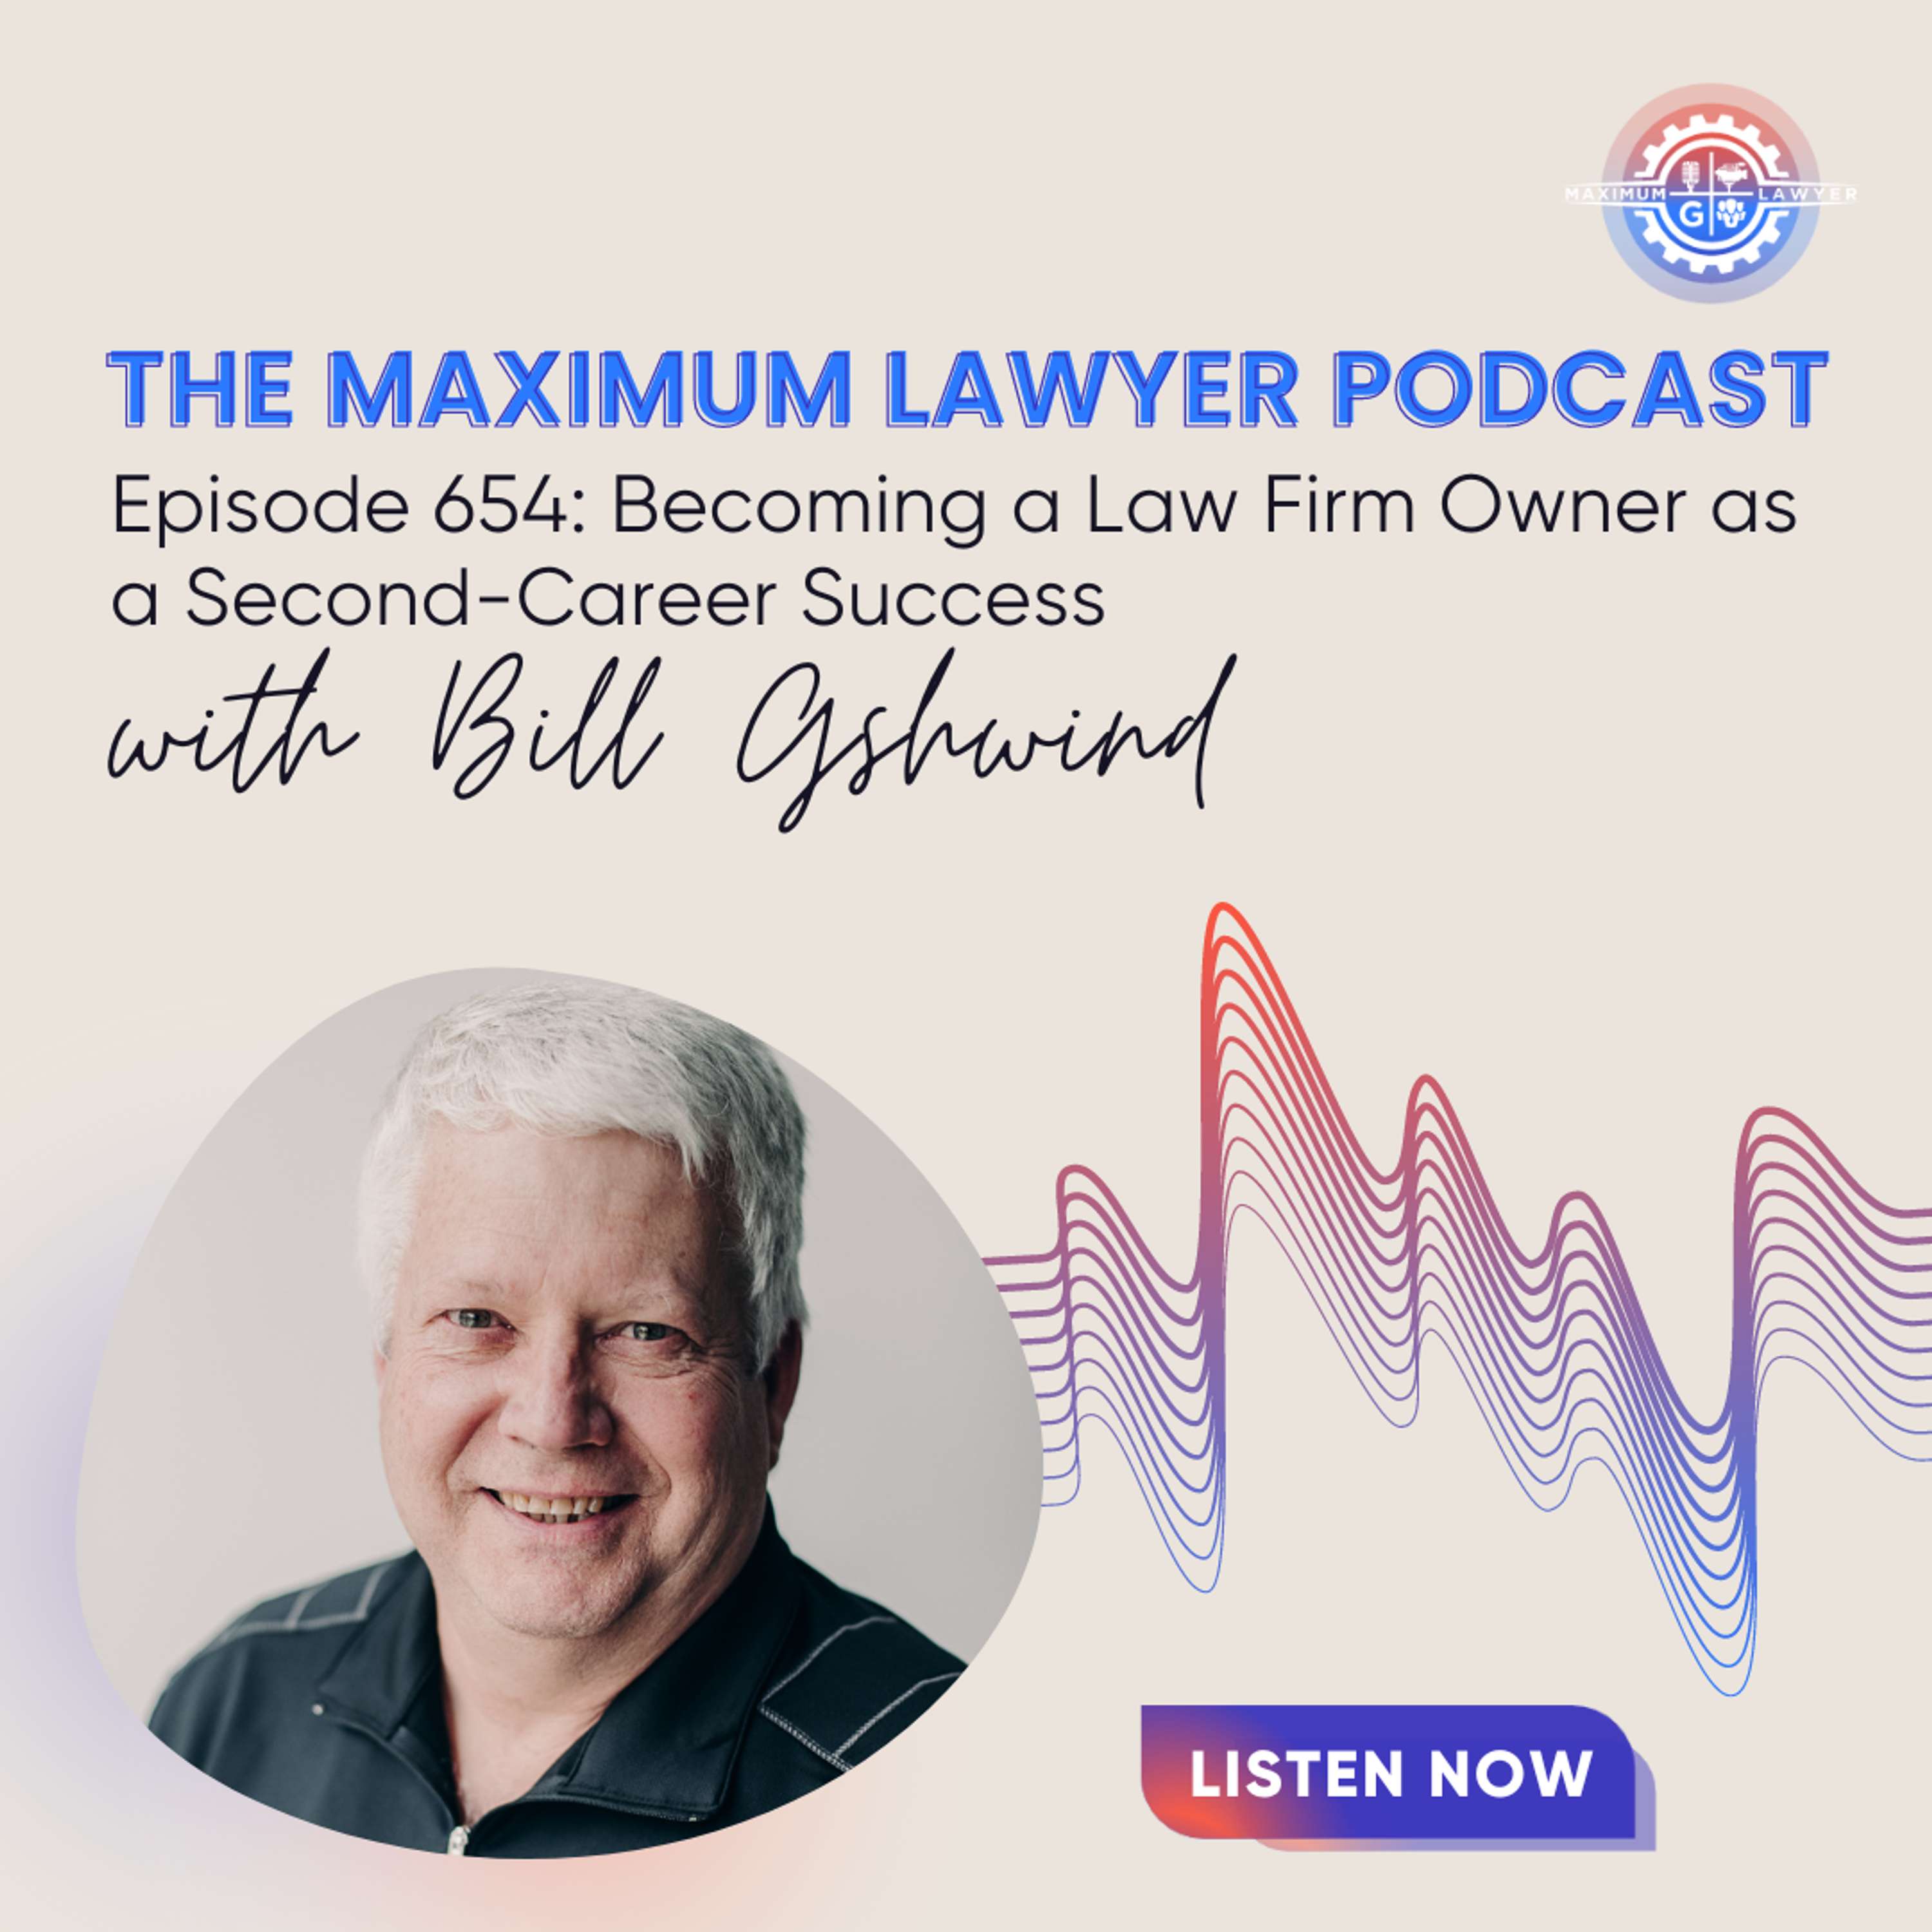 Becoming a Law Firm Owner as a Second-Career Success with Bill Gshwind